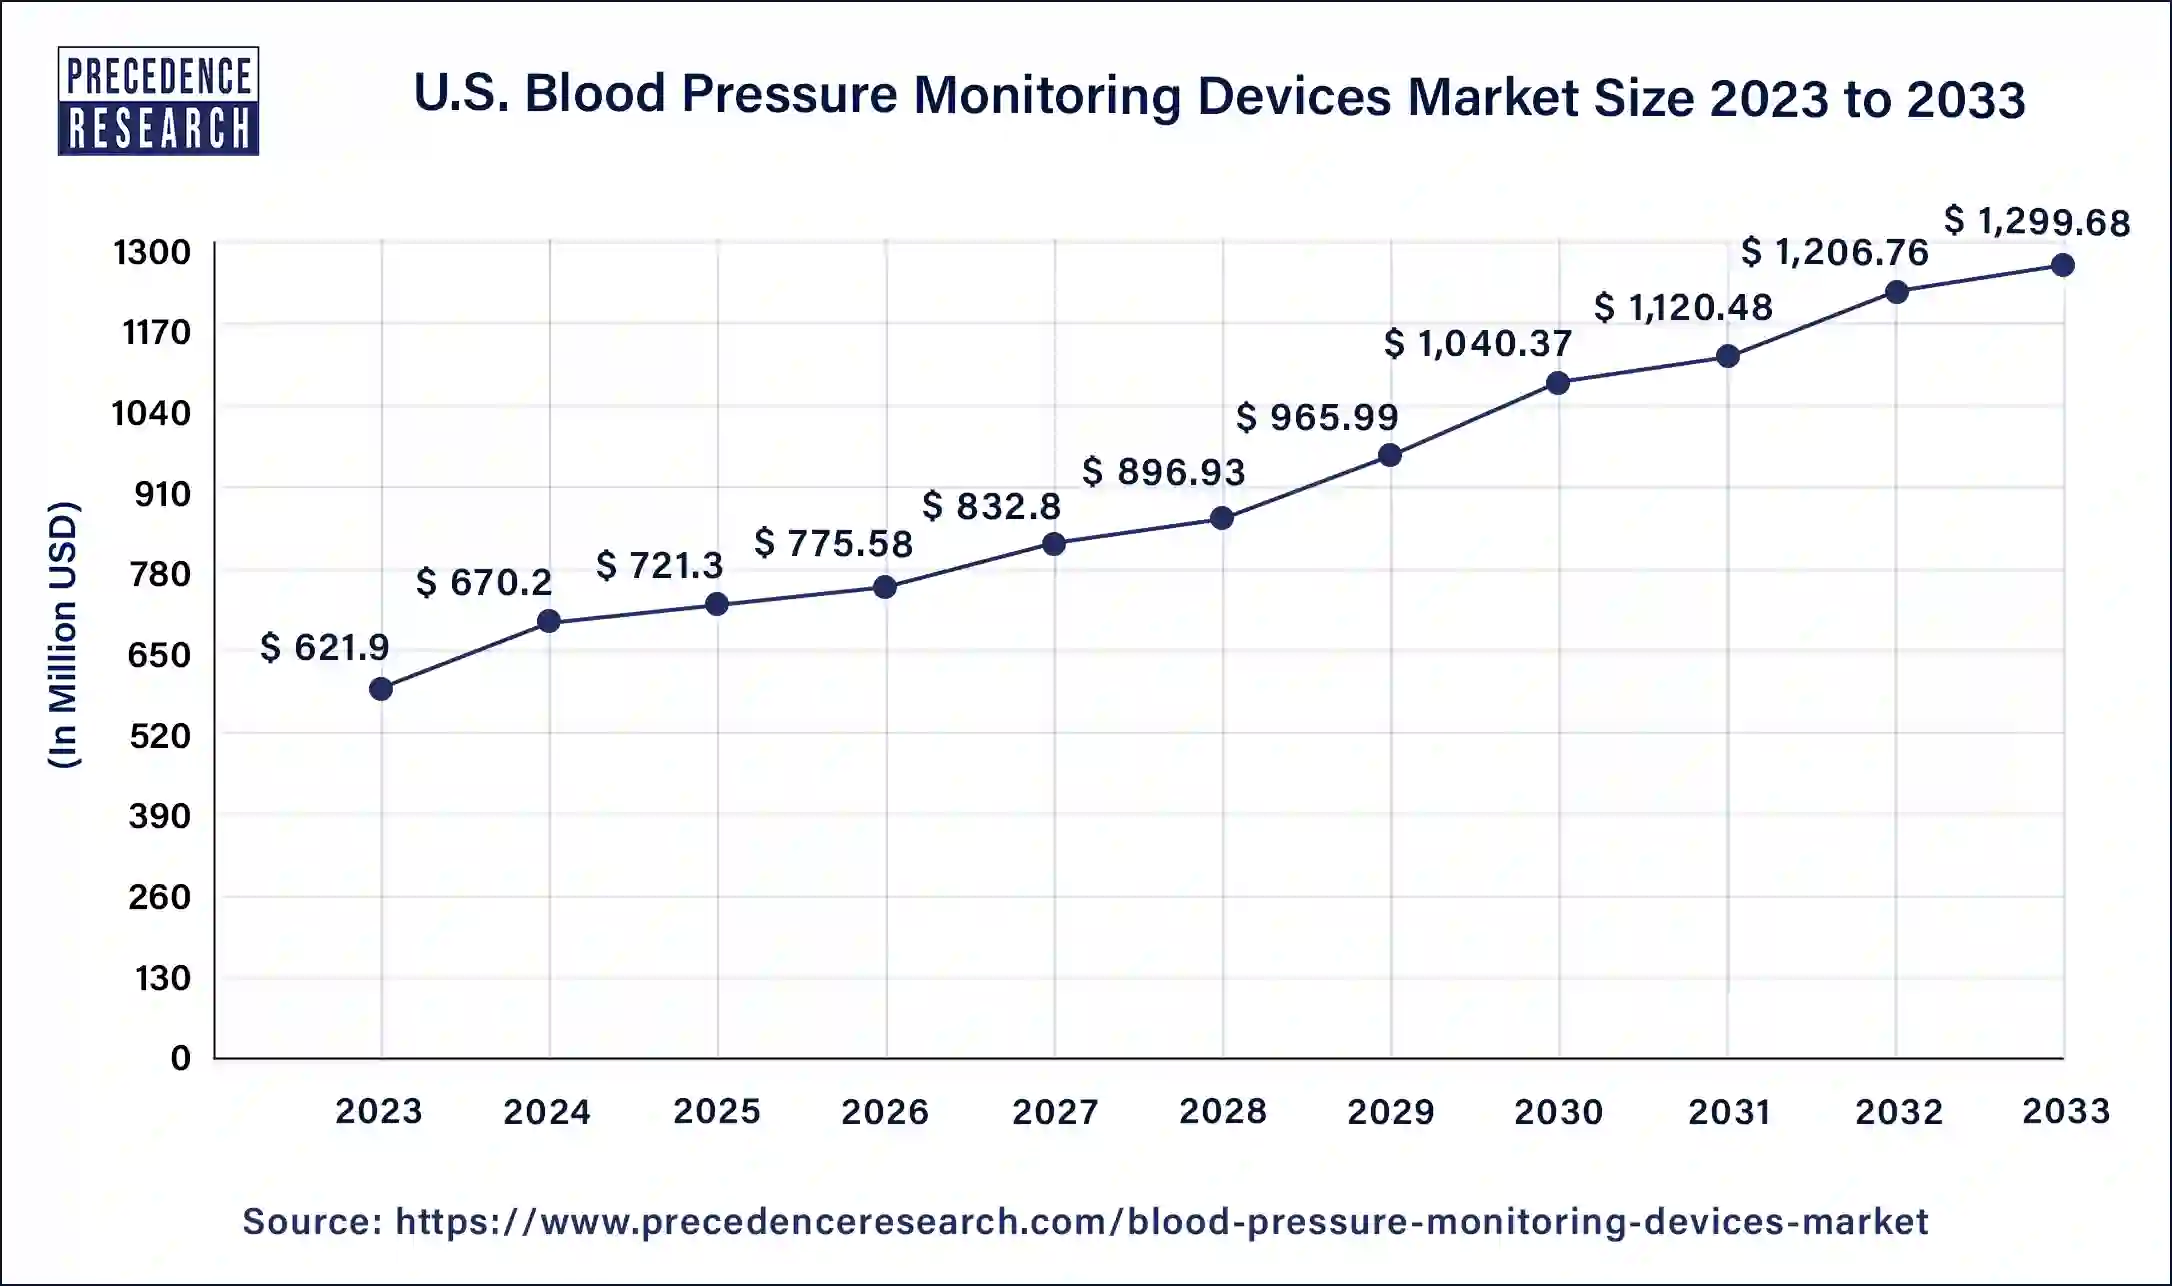 U.S. Blood Pressure Monitoring Devices Market Size 2024 to 2033